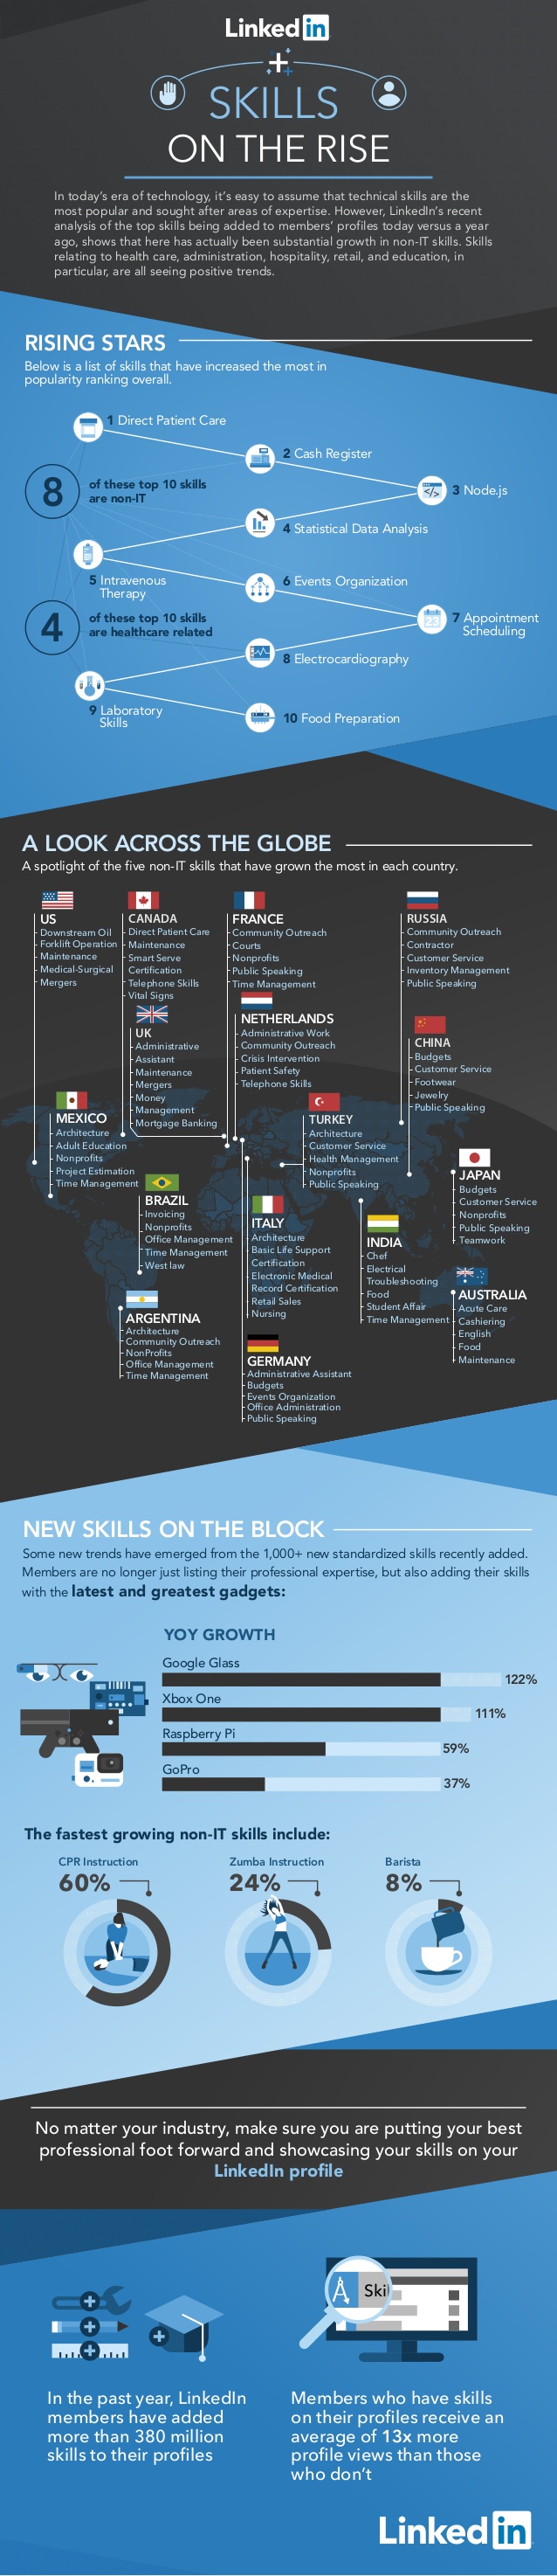 Your Skills Are Your Competitive Edge on LinkedIn [INFOGRAPHIC] | Official LinkedIn Blog